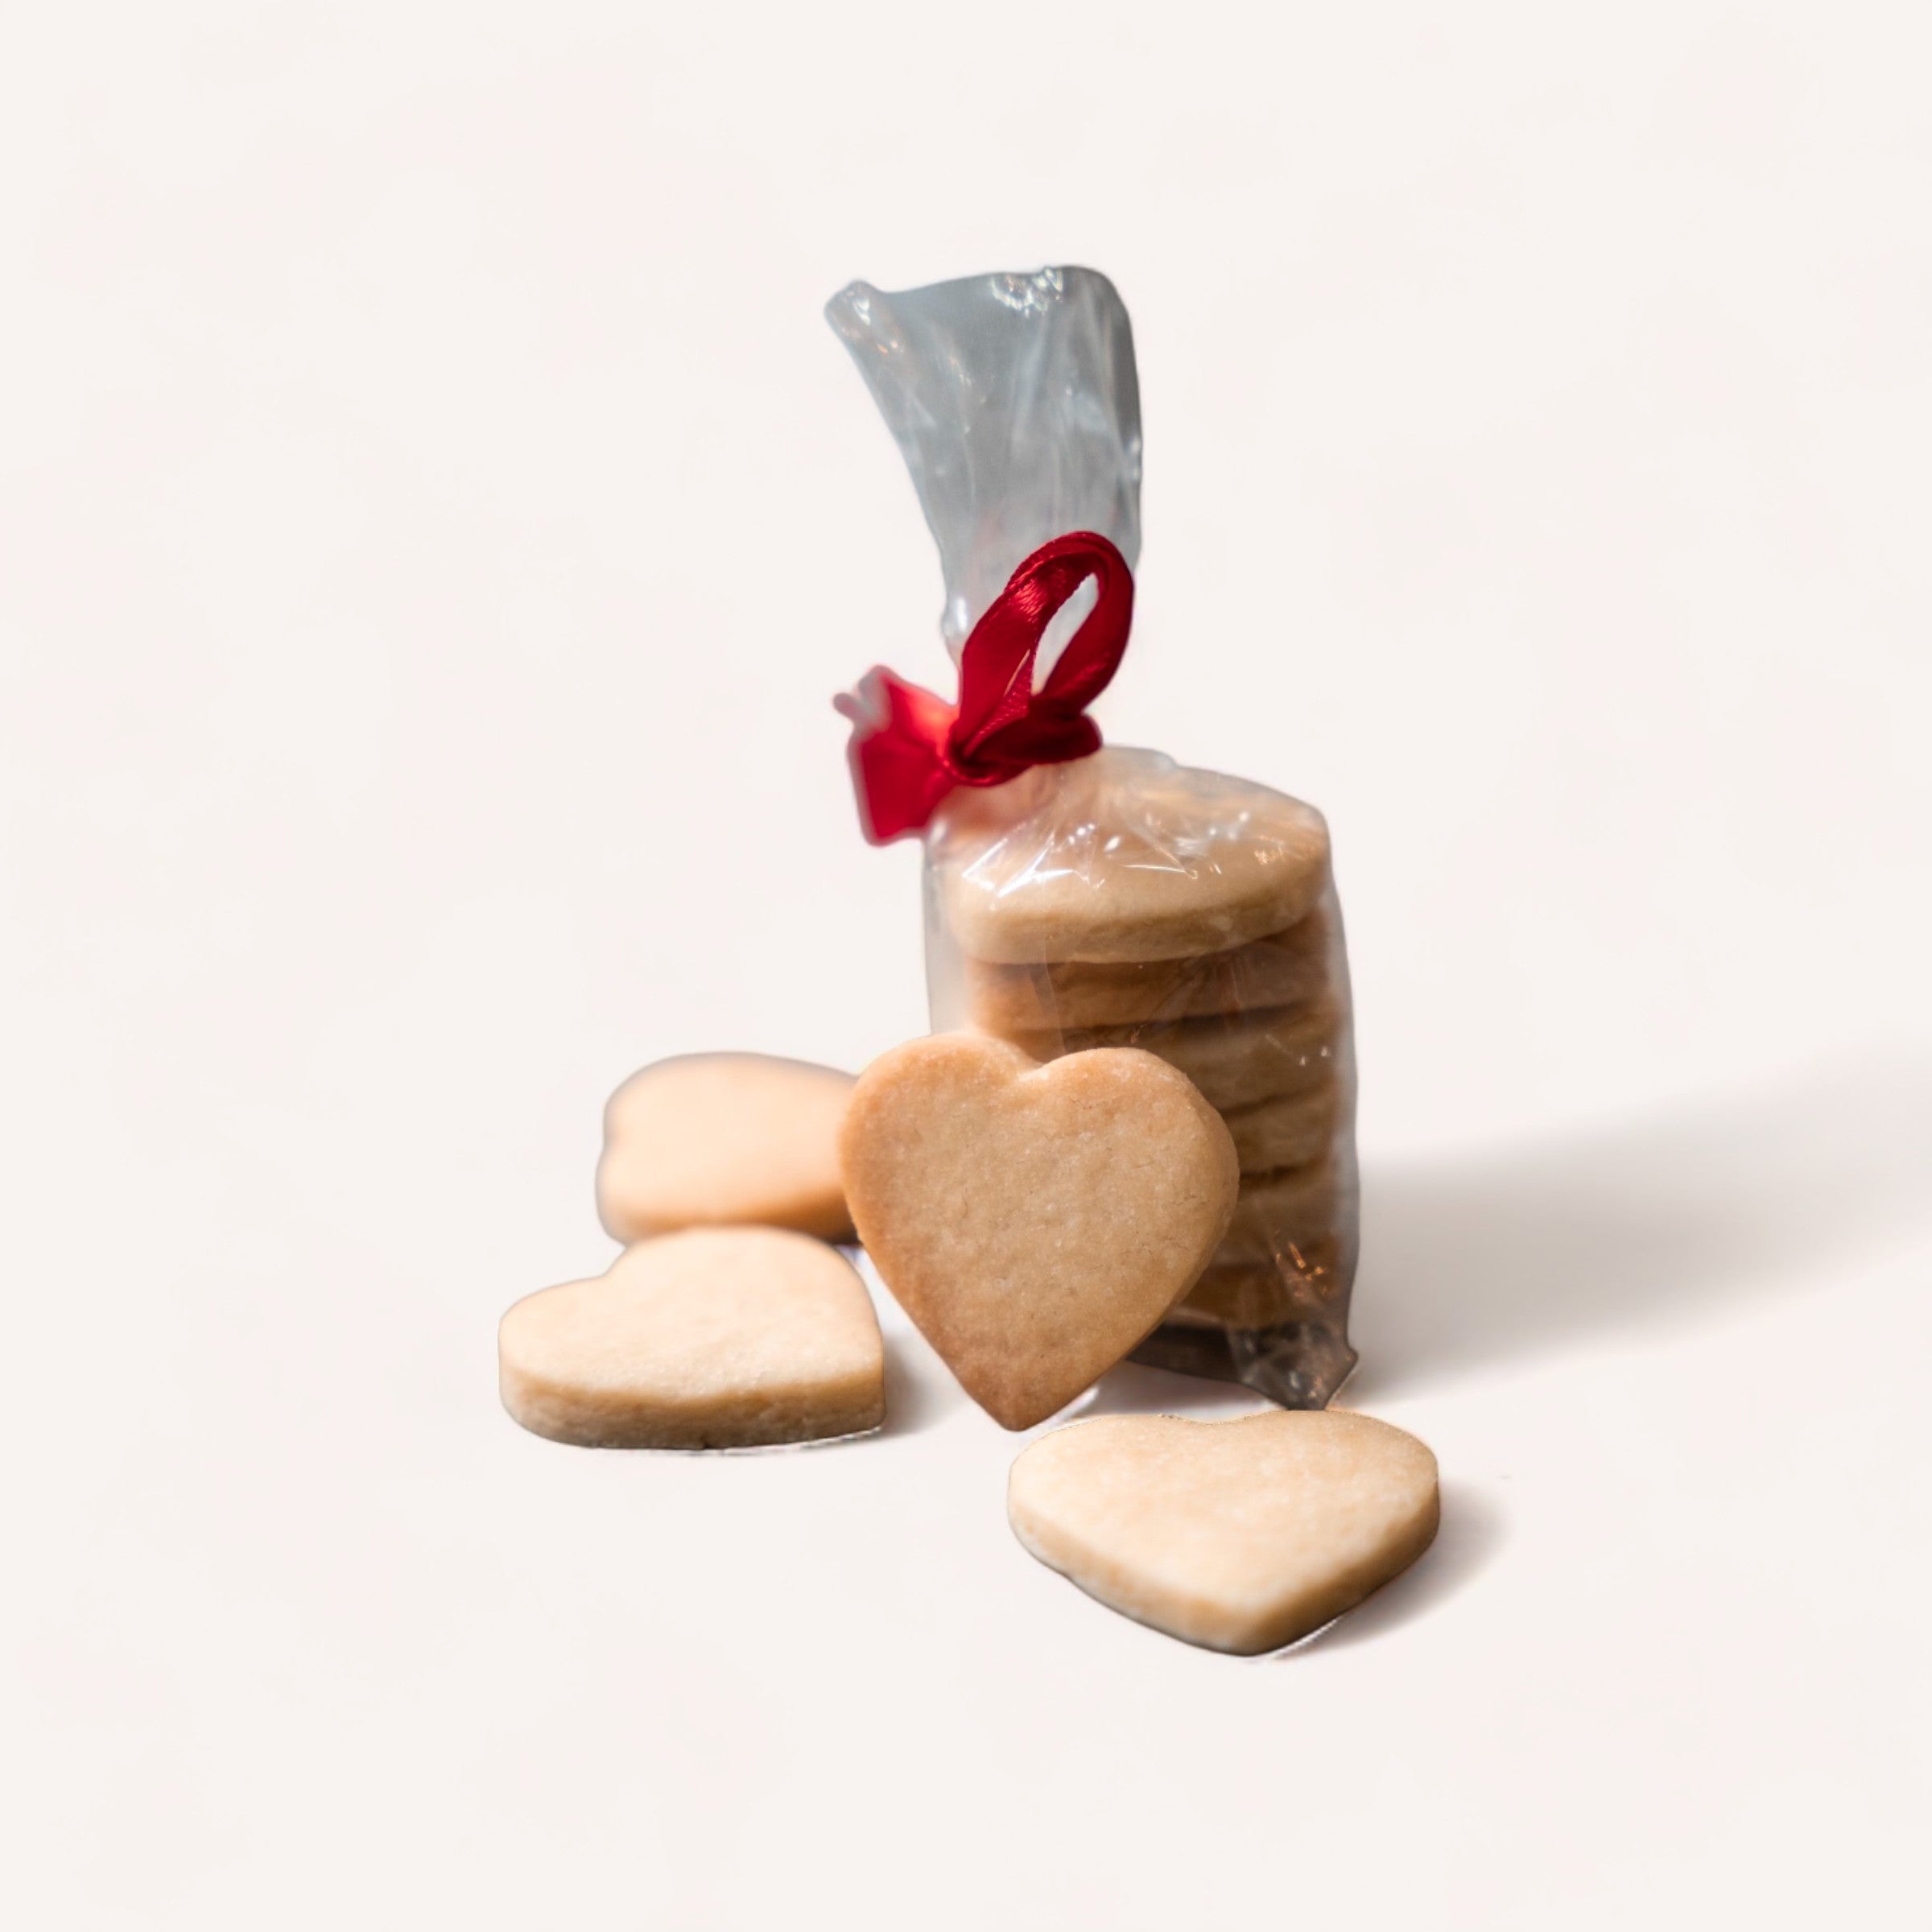 A bag of The Cookie Collective's Heart Cookie Bites tied with a red ribbon, with several cookies beside it, against a white background, makes for a heartfelt gift.